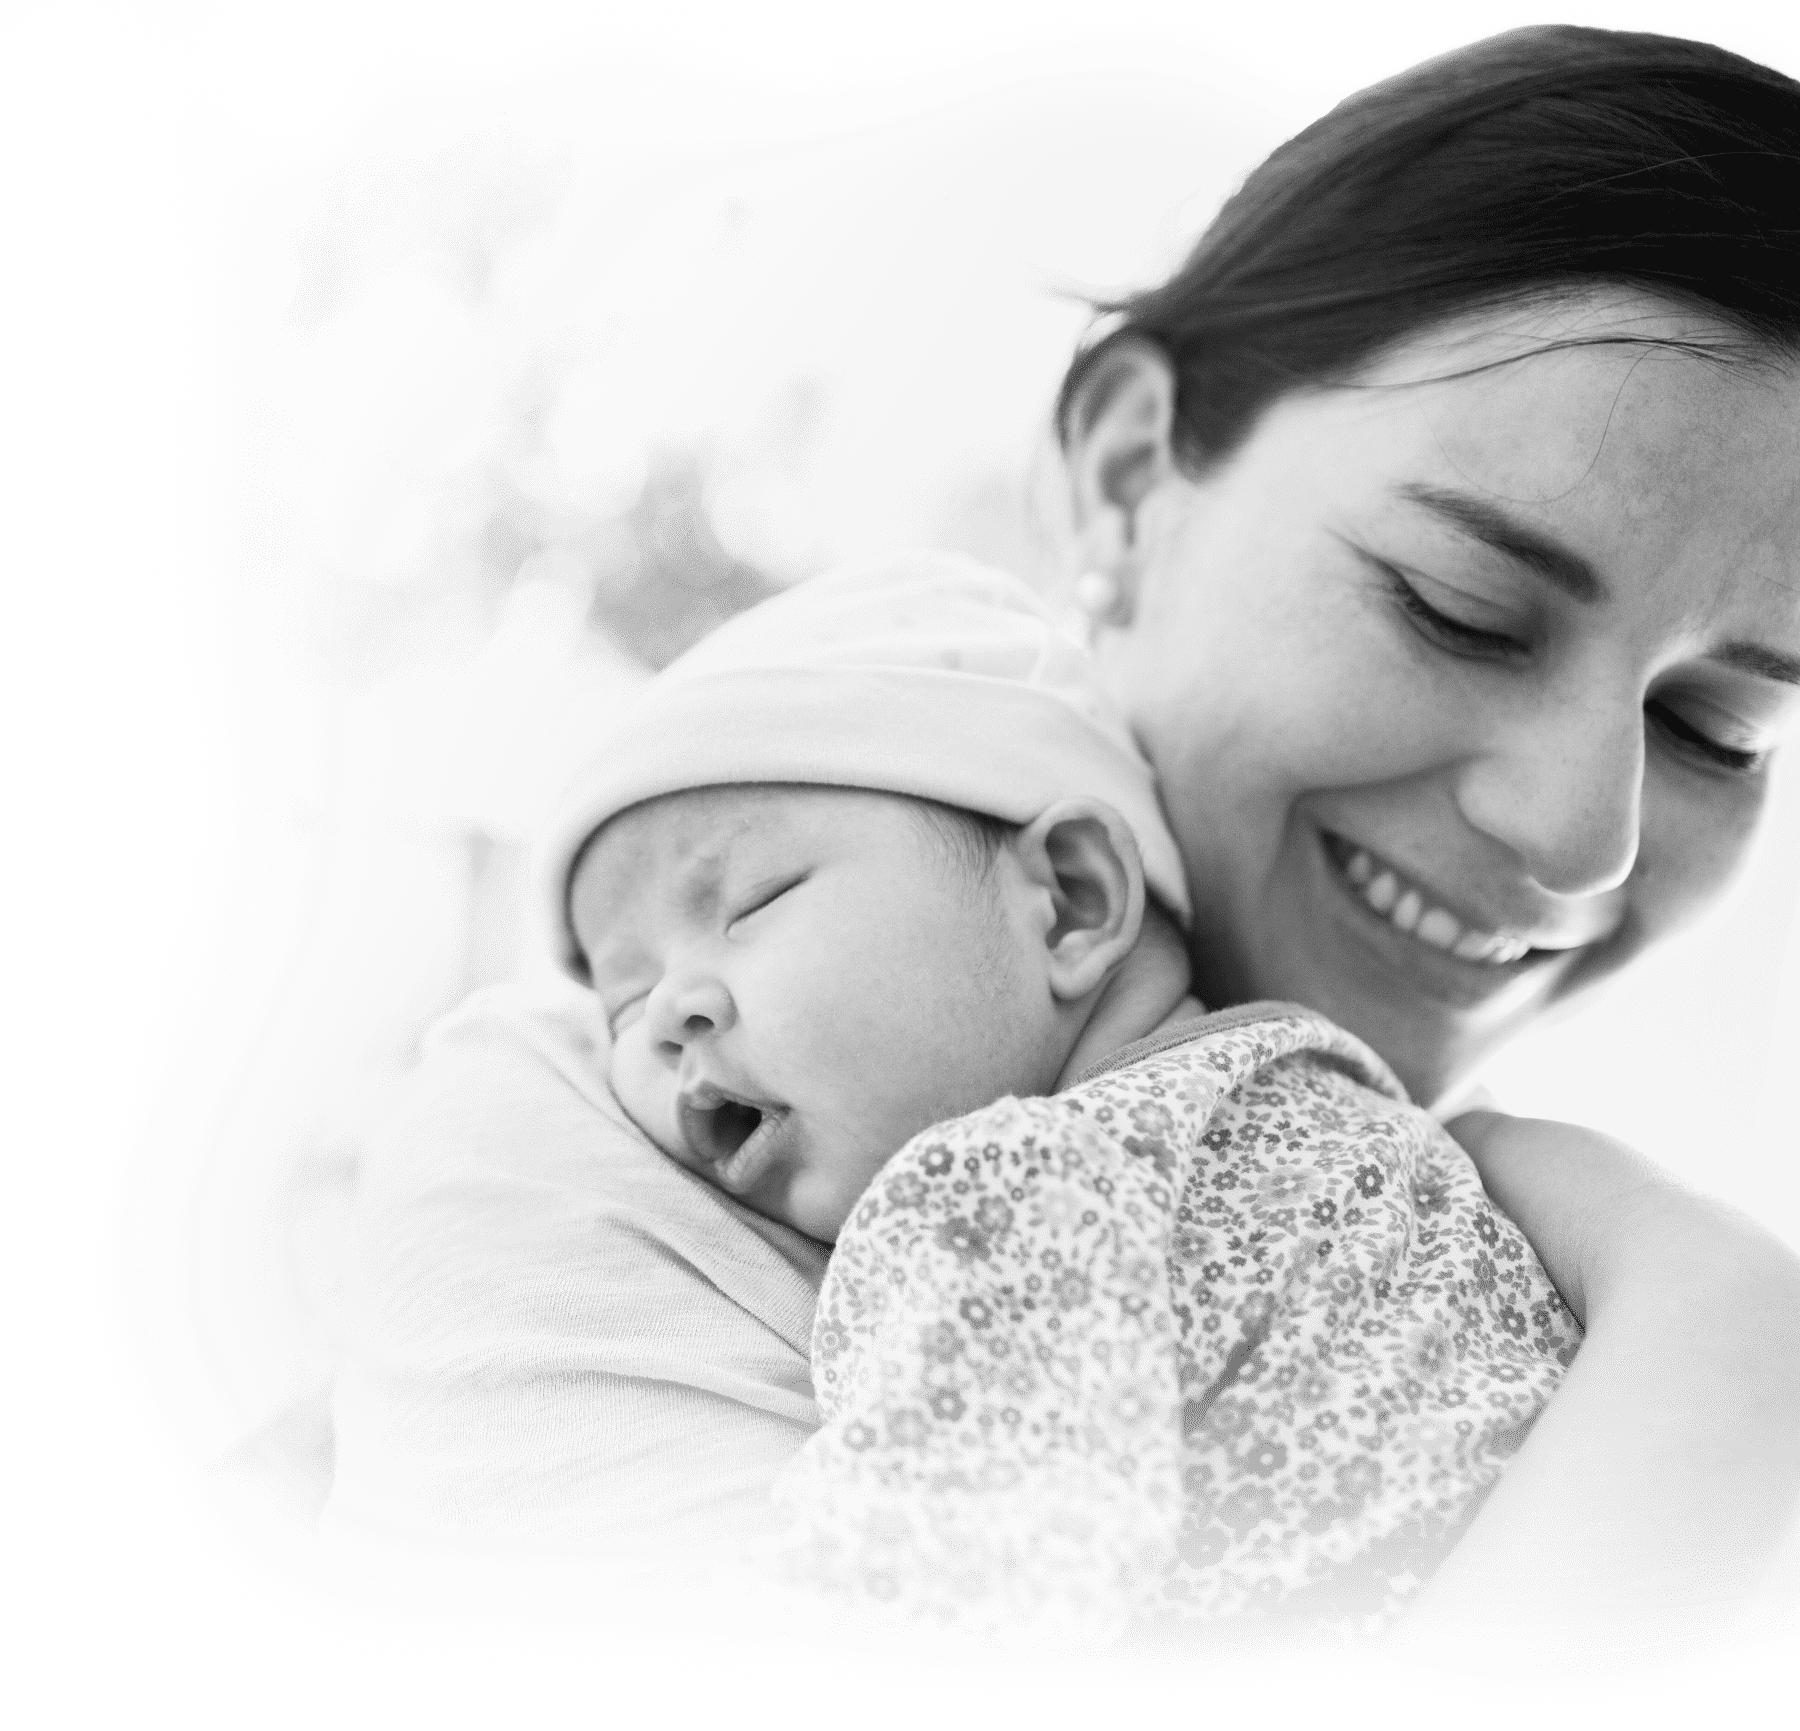 Woman smiling holding sleeping baby.